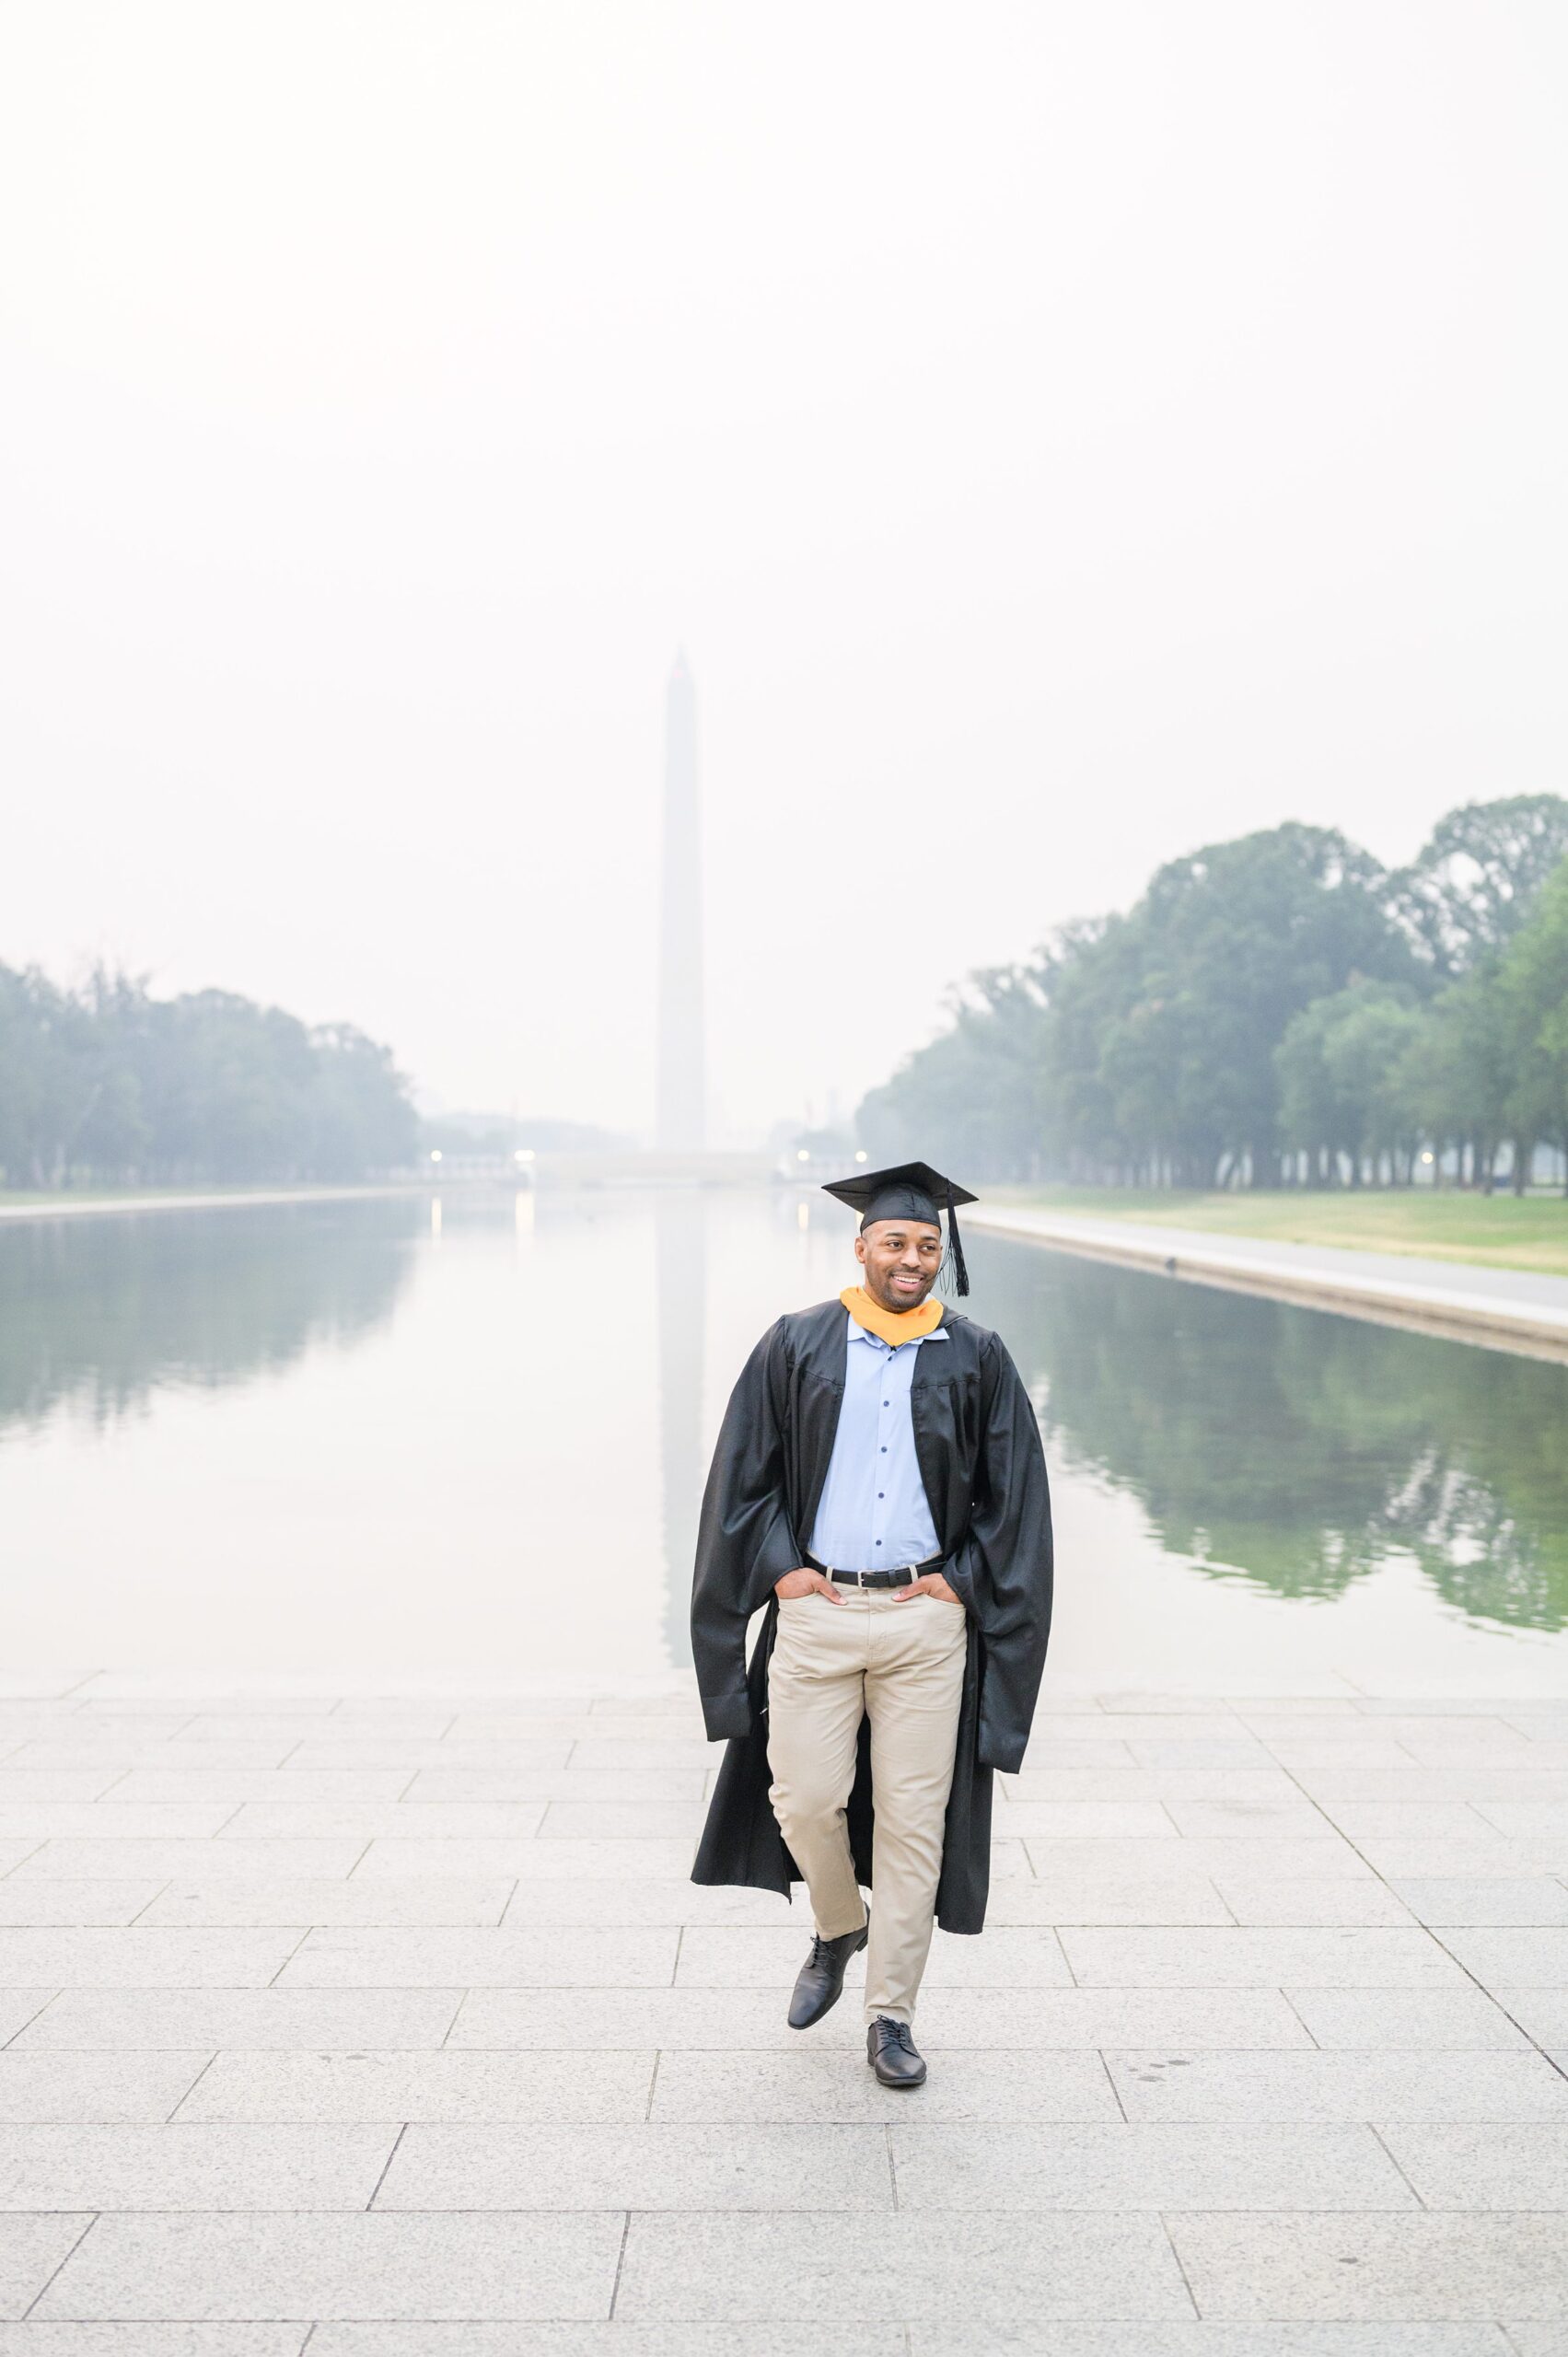 Brand and Christine's Graduation Photos on the National Mall photographed by Baltimore Photographer Cait Kramer